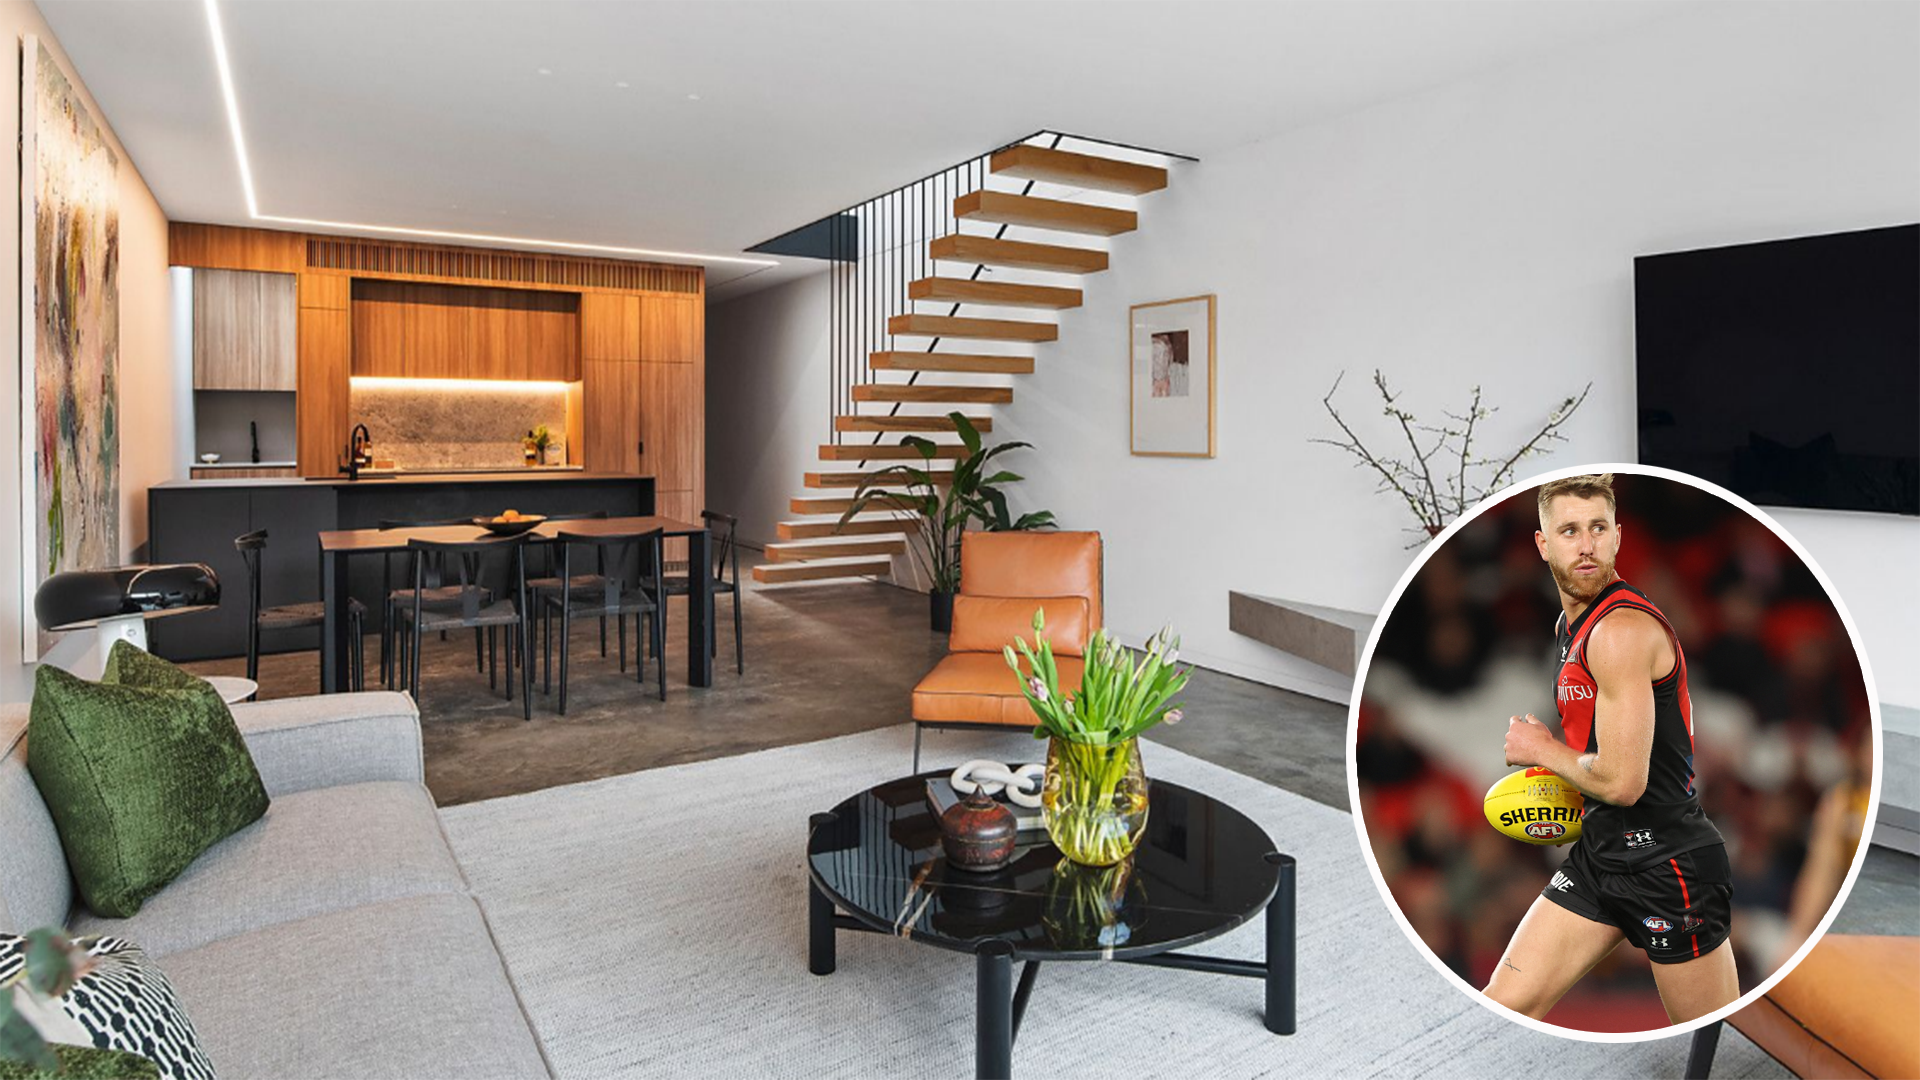 Bombers captain lists his renovated Albert Park home for just over $3m